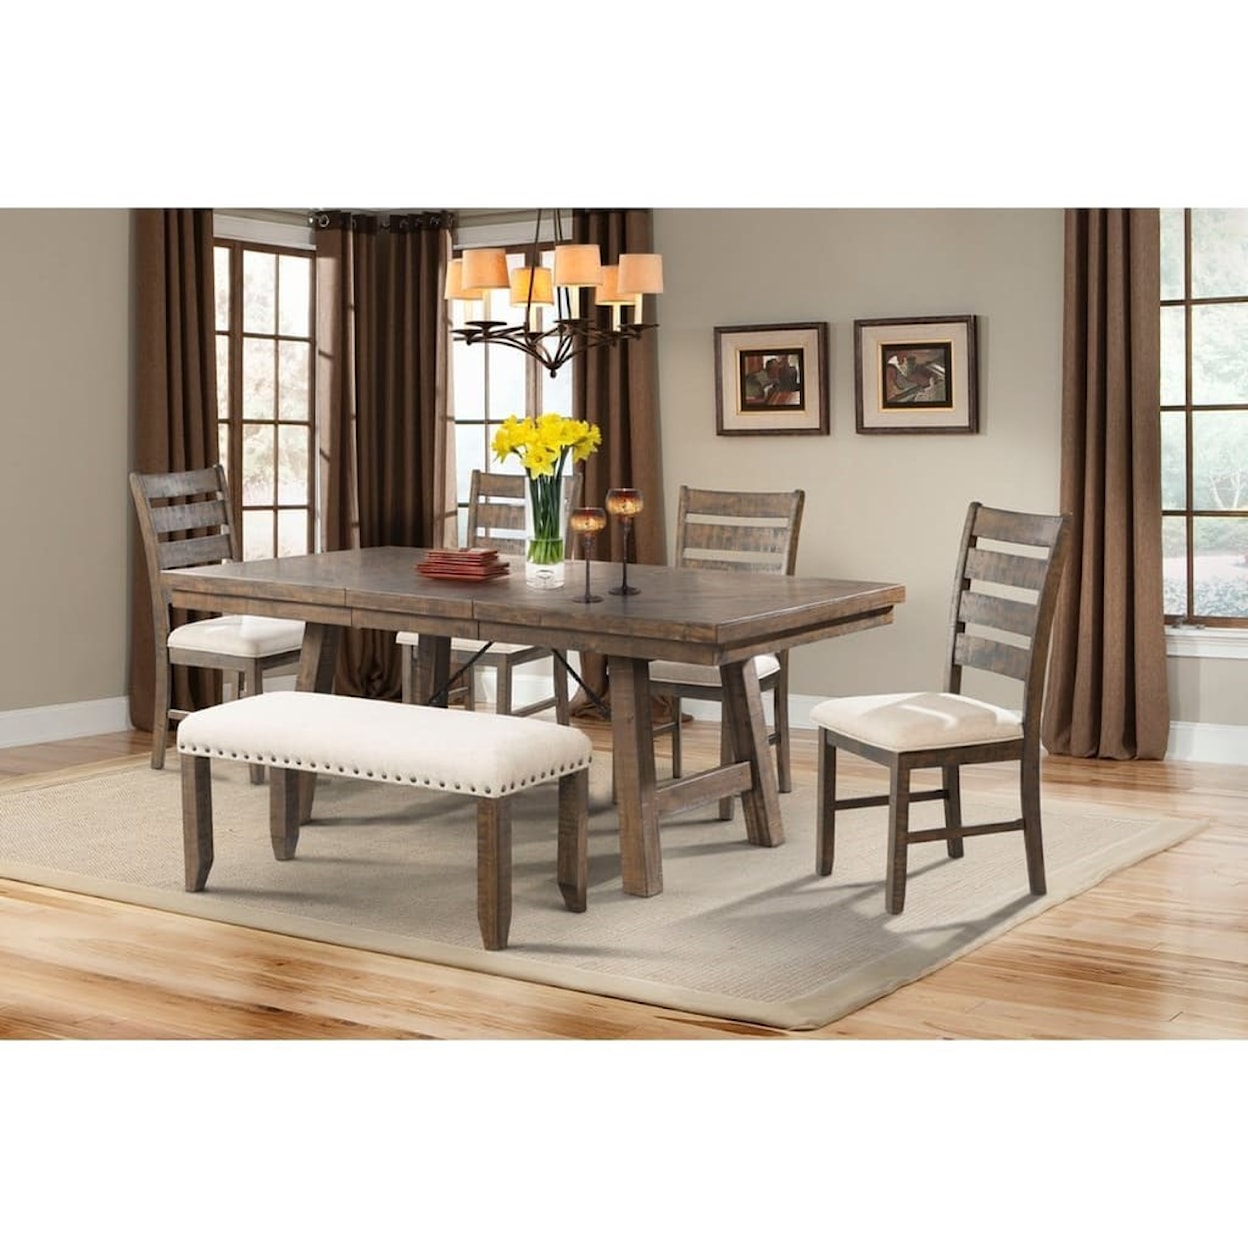 Elements Jax Dining Set with Bench